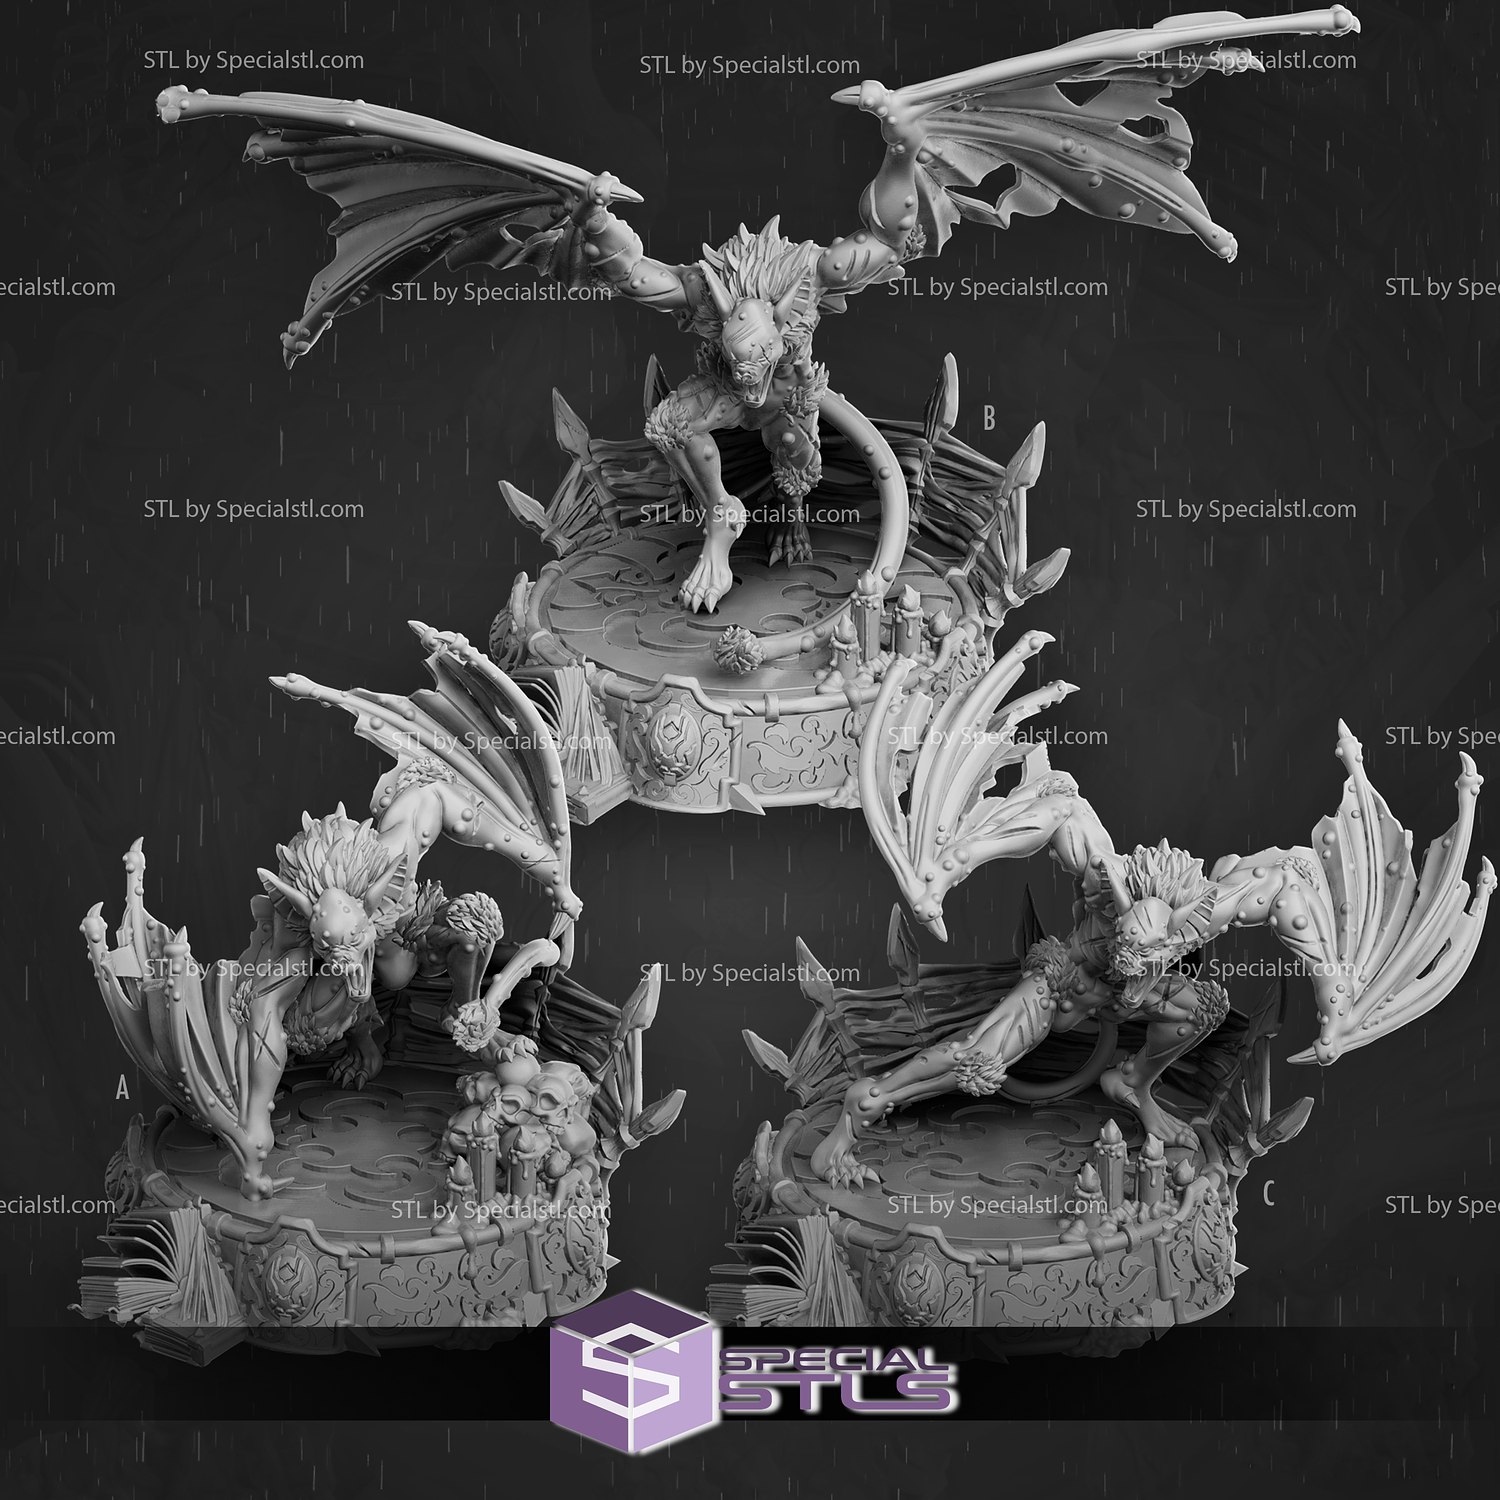 March 2021 Midnight Cast N Play Miniatures